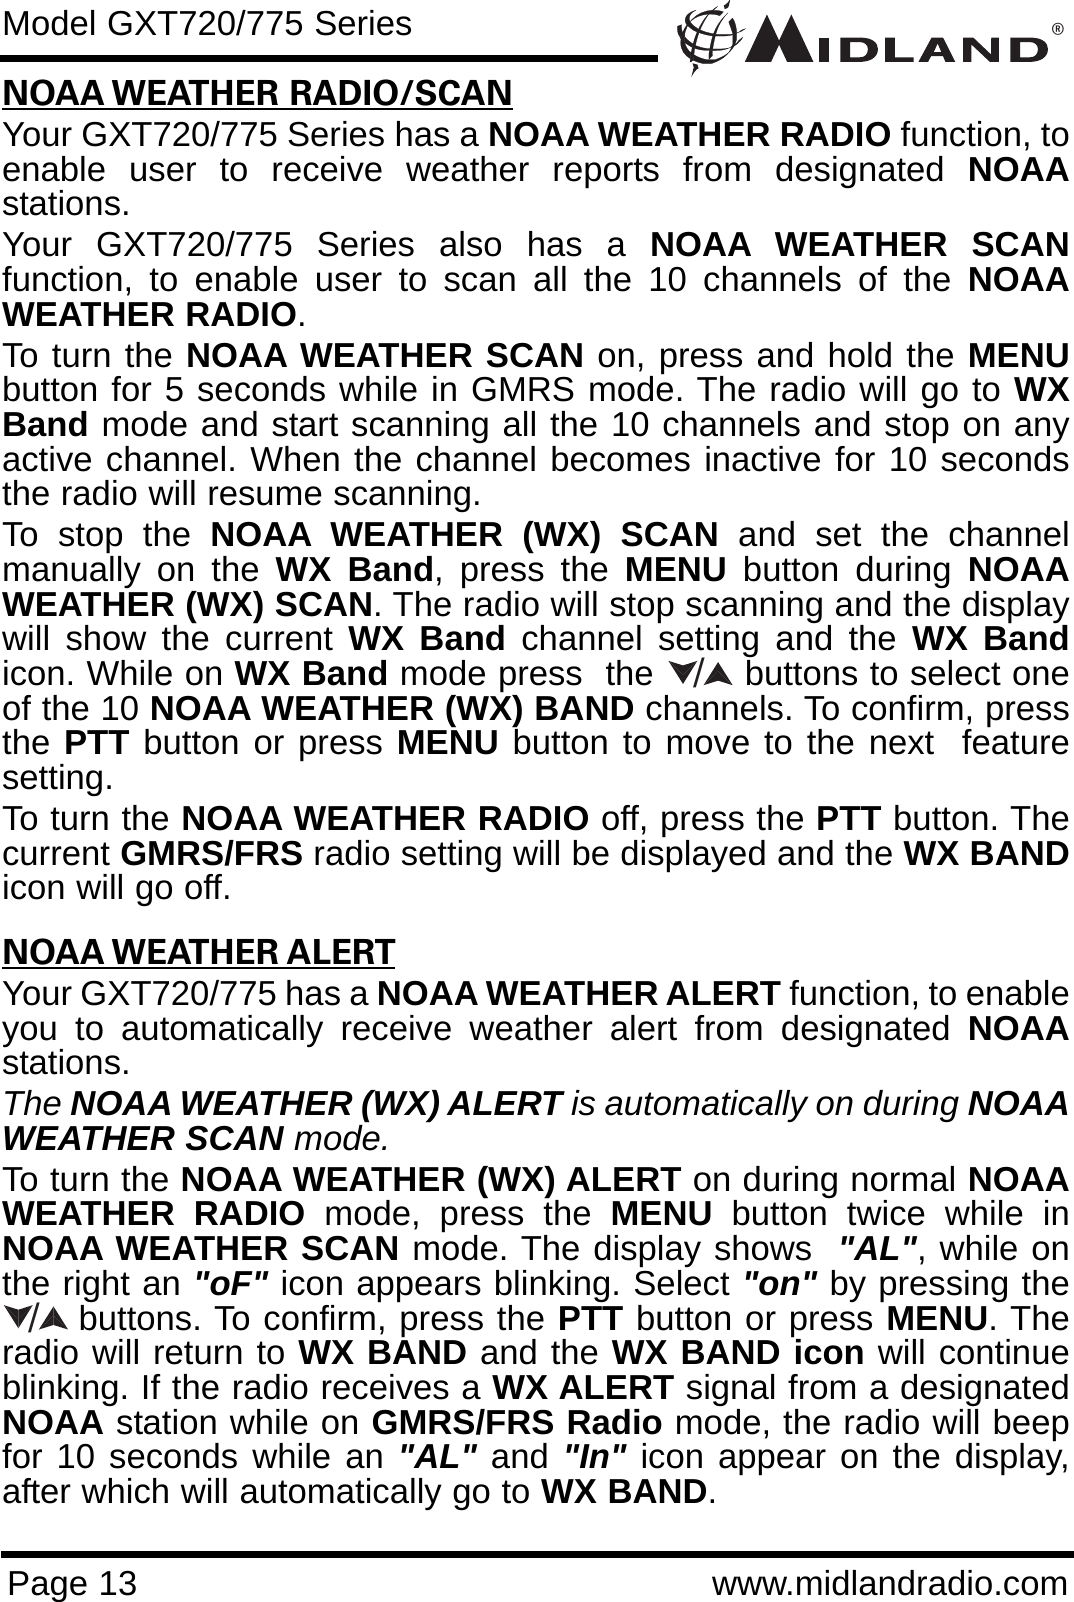 ®Page 13 www.midlandradio.comNOAA WEATHER RADIO/SCANYour GXT720/775 Series has a NOAA WEATHER RADIO function, toenable user to receive weather reports from designated NOAAstations. Your GXT720/775 Series also has a NOAA WEATHER SCANfunction, to enable user to scan all the 10 channels of the NOAAWEATHER RADIO. To turn the NOAA WEATHER SCAN on, press and hold the MENUbutton for 5 seconds while in GMRS mode. The radio will go to WXBand mode and start scanning all the 10 channels and stop on anyactive channel. When the channel becomes inactive for 10 secondsthe radio will resume scanning.To stop the NOAA WEATHER (WX) SCAN and set the channelmanually on the WX Band, press the MENU button during NOAAWEATHER (WX) SCAN. The radio will stop scanning and the displaywill show the current WX Band channel setting and the WX Bandicon. While on WX Band mode press  the        buttons to select oneof the 10 NOAA WEATHER (WX) BAND channels. To confirm, pressthe PTT button or press MENU button to move to the next  featuresetting.To turn the NOAA WEATHER RADIO off, press the PTT button. Thecurrent GMRS/FRS radio setting will be displayed and the WX BANDicon will go off.NOAA WEATHER ALERTYour GXT720/775 has a NOAA WEATHER ALERT function, to enableyou to automatically receive weather alert from designated NOAAstations. The NOAA WEATHER (WX) ALERT is automatically on during NOAAWEATHER SCAN mode.To turn the NOAA WEATHER (WX) ALERT on during normal NOAAWEATHER RADIO mode, press the MENU button twice while inNOAA WEATHER SCAN mode. The display shows  &quot;AL&quot;, while onthe right an &quot;oF&quot; icon appears blinking. Select &quot;on&quot; by pressing thebuttons. To confirm, press the PTT button or press MENU. Theradio will return to WX BAND and the WX BAND icon will continueblinking. If the radio receives a WX ALERT signal from a designatedNOAA station while on GMRS/FRS Radio mode, the radio will beepfor 10 seconds while an &quot;AL&quot; and &quot;In&quot; icon appear on the display,after which will automatically go to WX BAND. Model GXT720/775 Series//